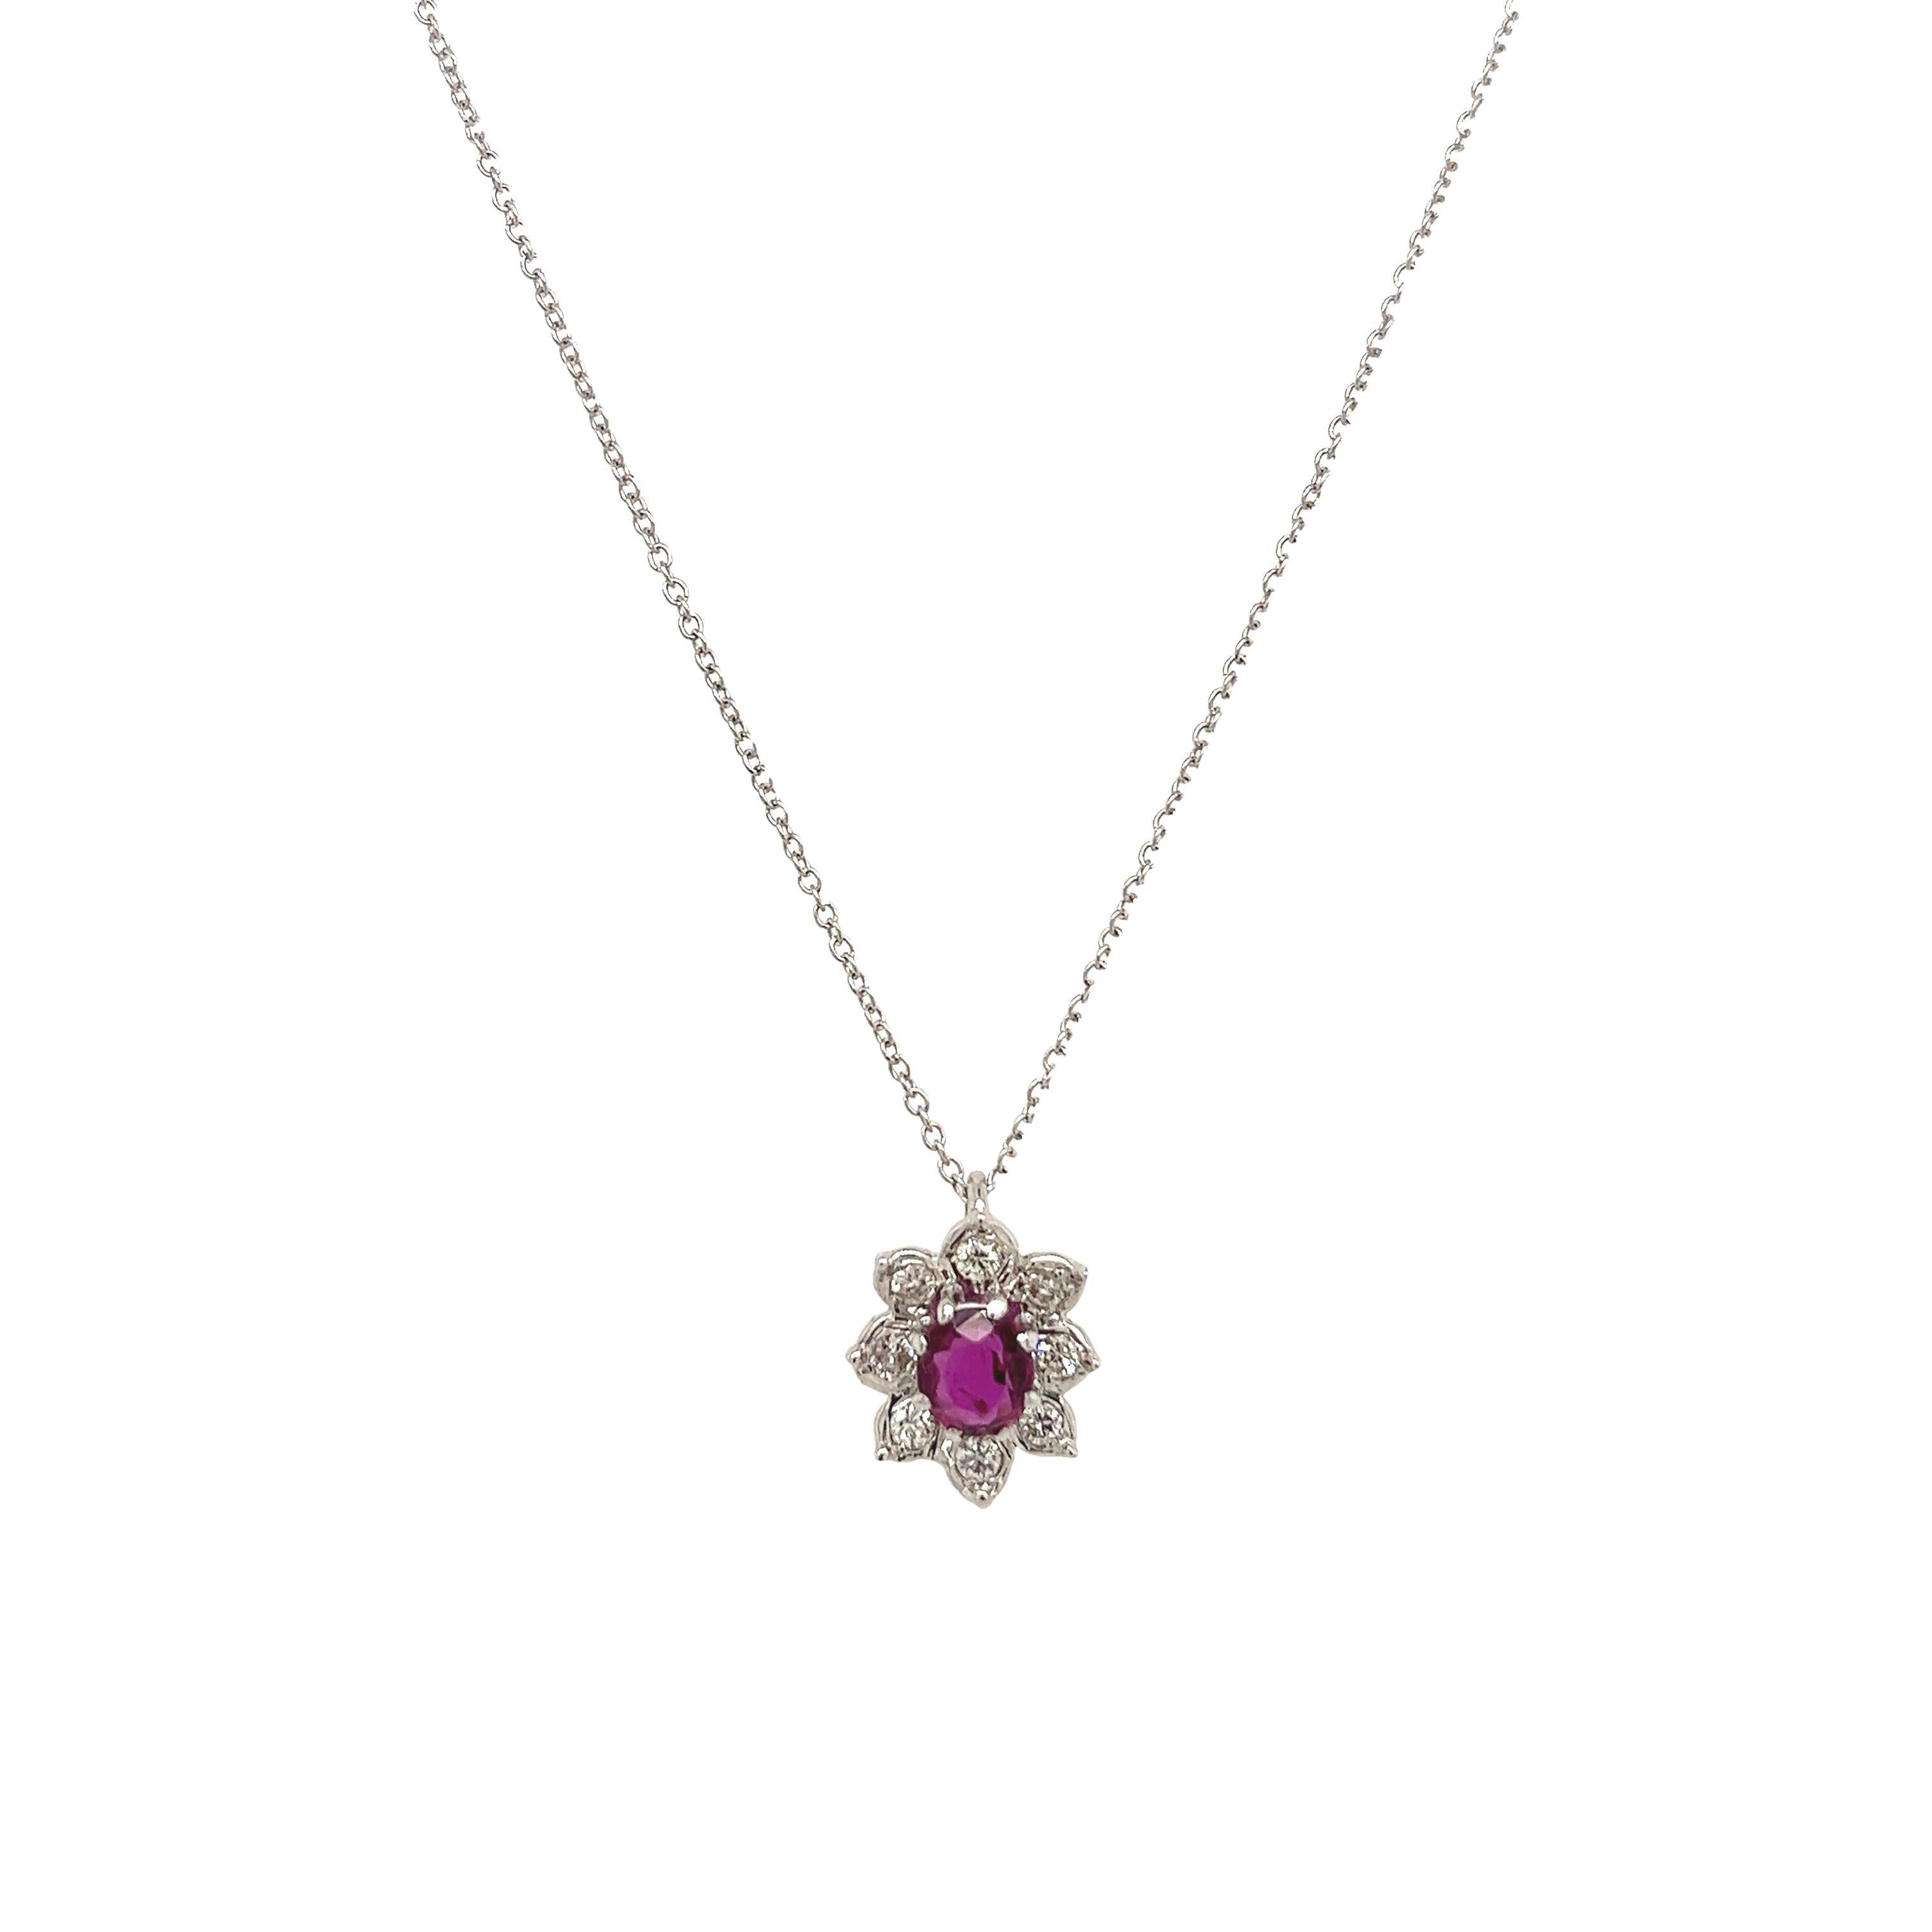 This gorgeous ruby & diamond pendant is set with a oval natural ruby and 8 round brilliant cut diamonds 
in 18ct white gold setting. The pendant is suspended from a 18ct white gold chain that measures 18 inches adjustable at 16